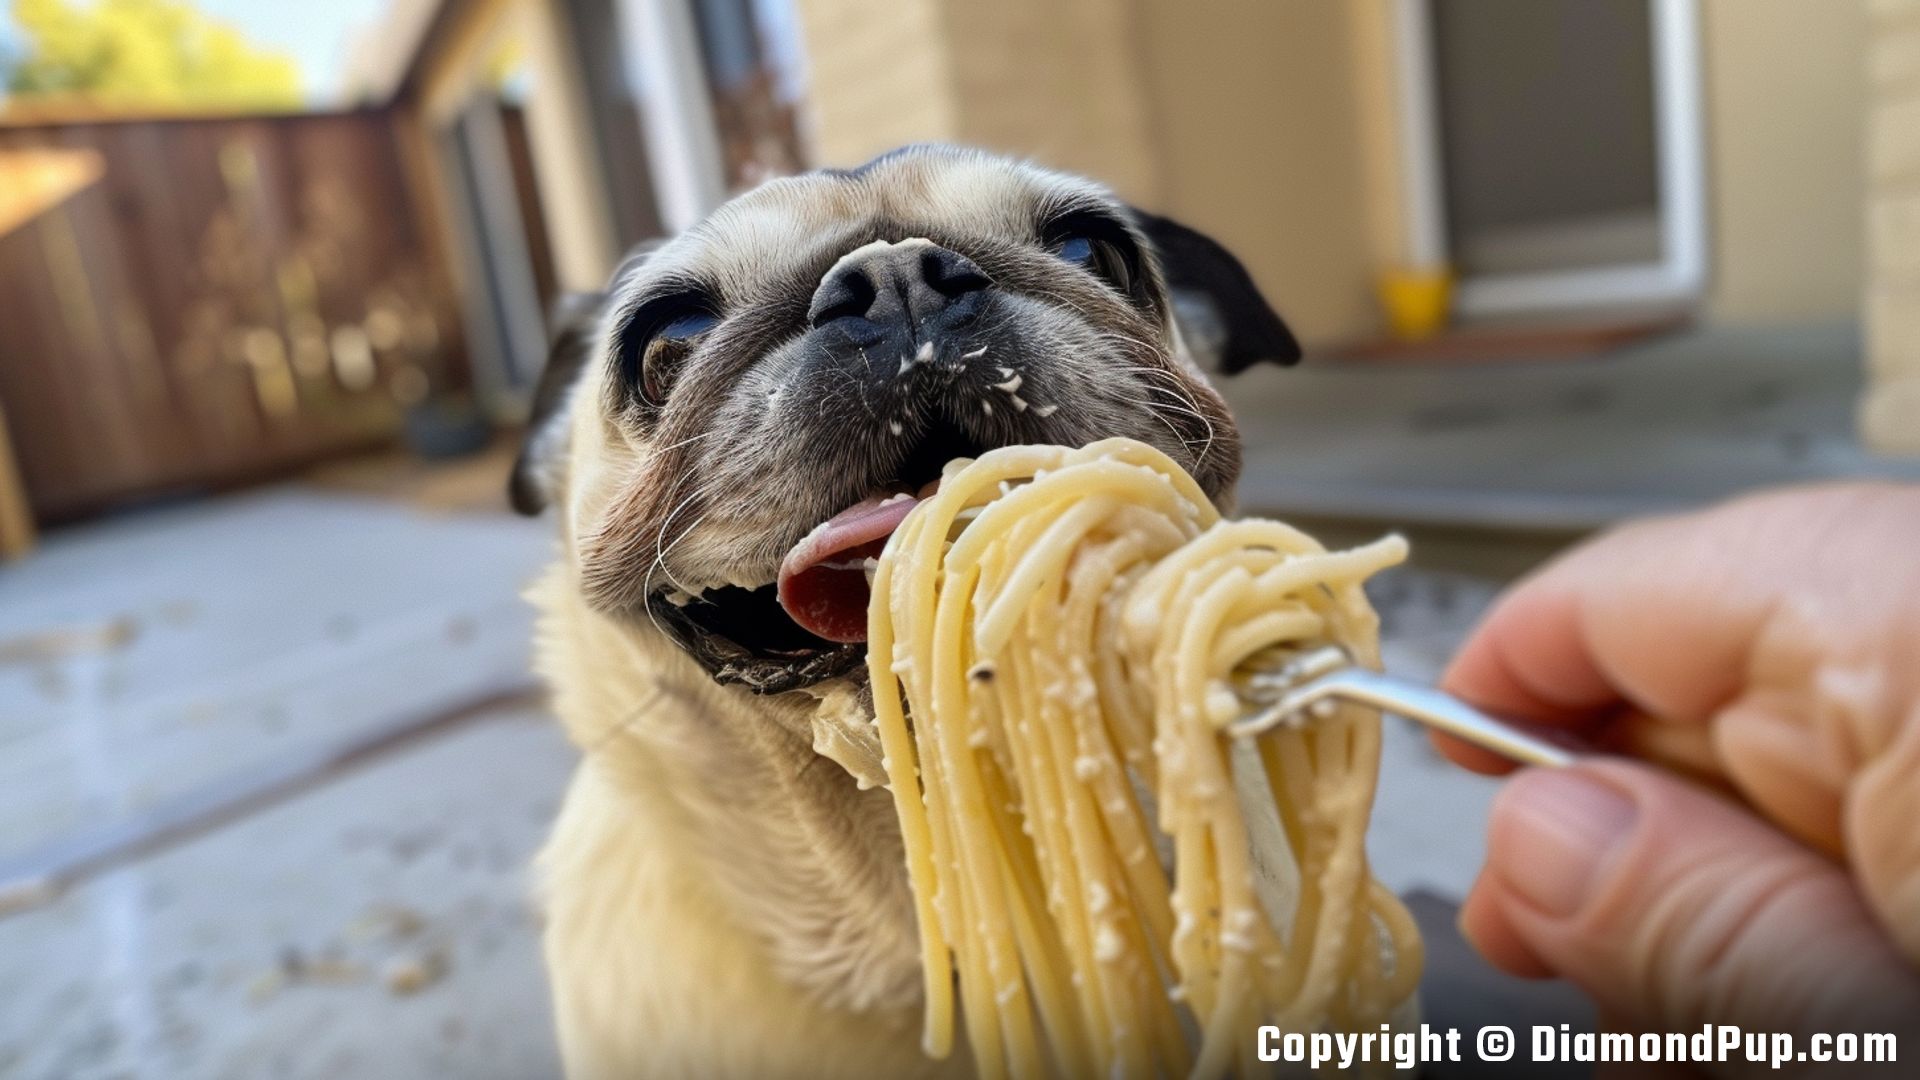 Picture of a Cute Pug Eating Pasta